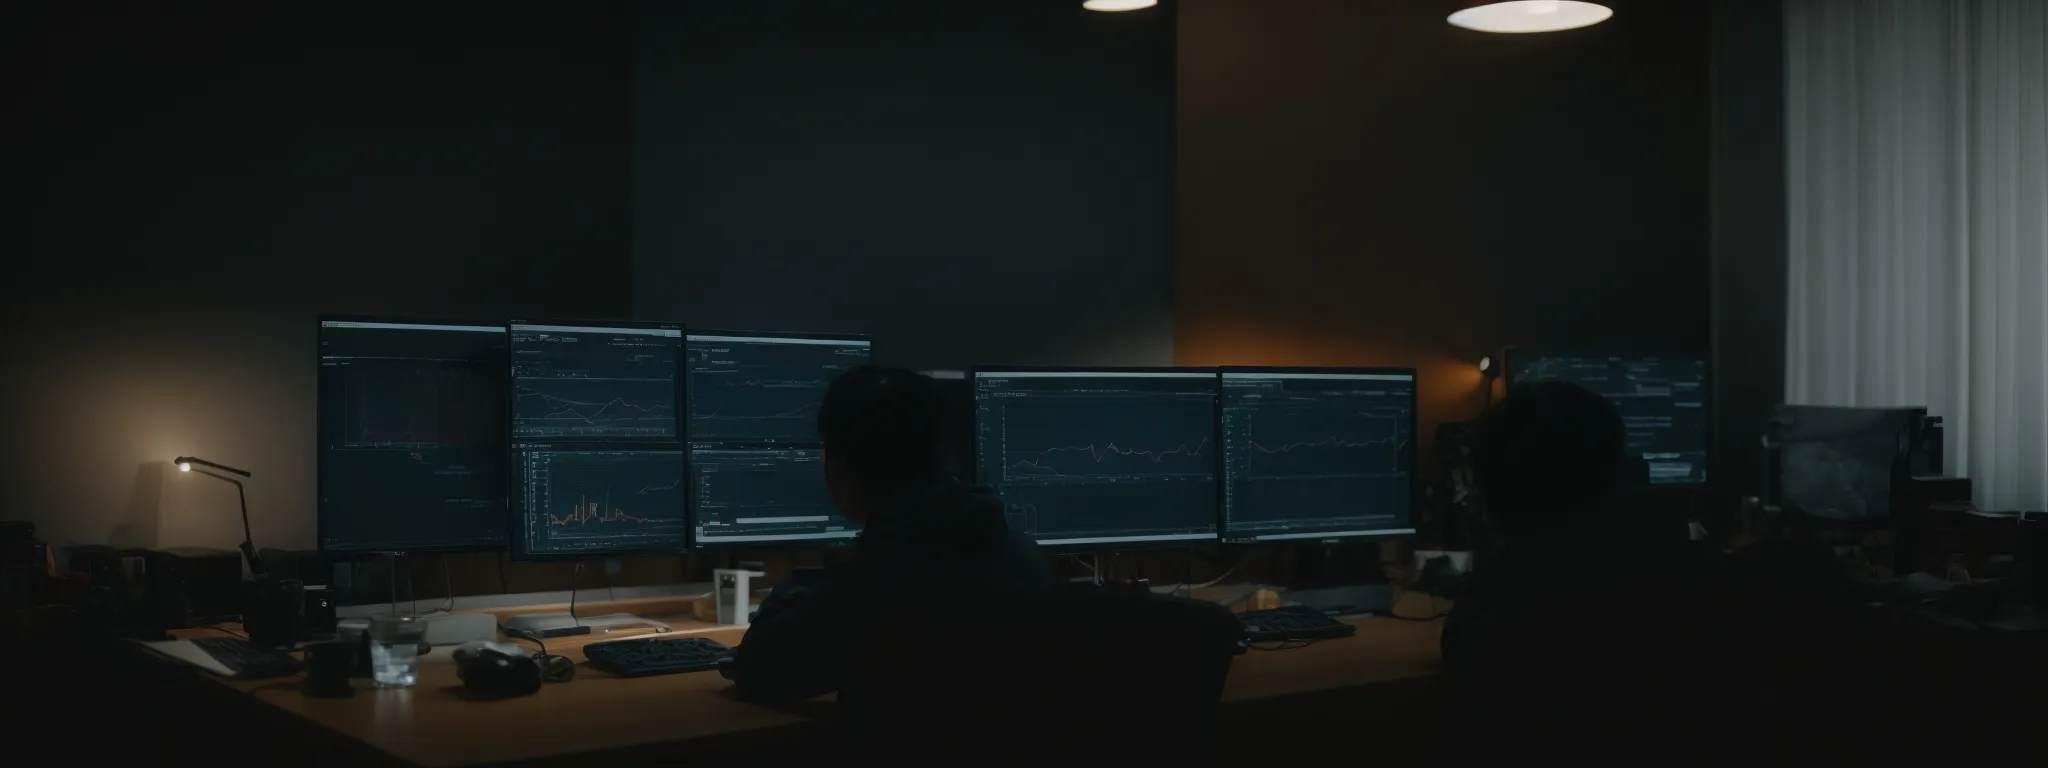 a person sitting at a computer, analyzing complex graphs and data metrics on the screen.